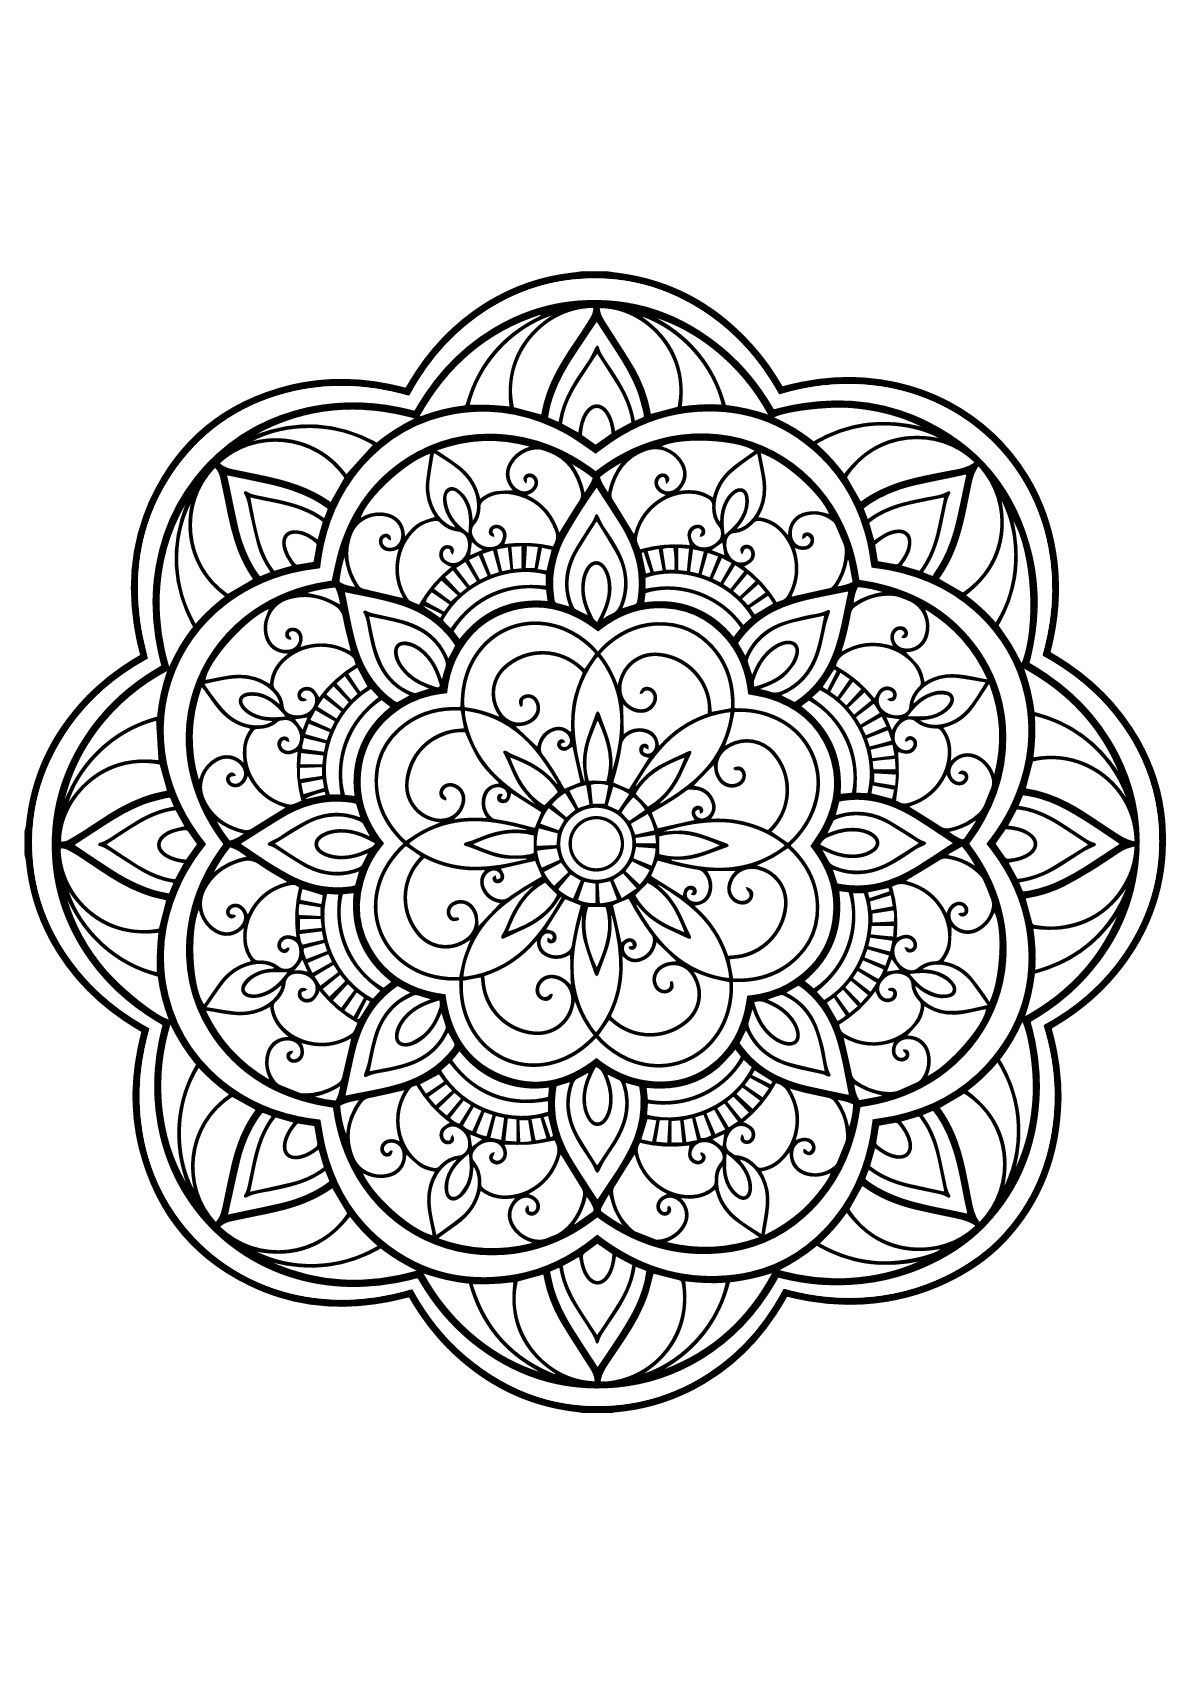 Download Mandala From Free Coloring Books For Adults 14 Mandalas Adult Coloring Pages